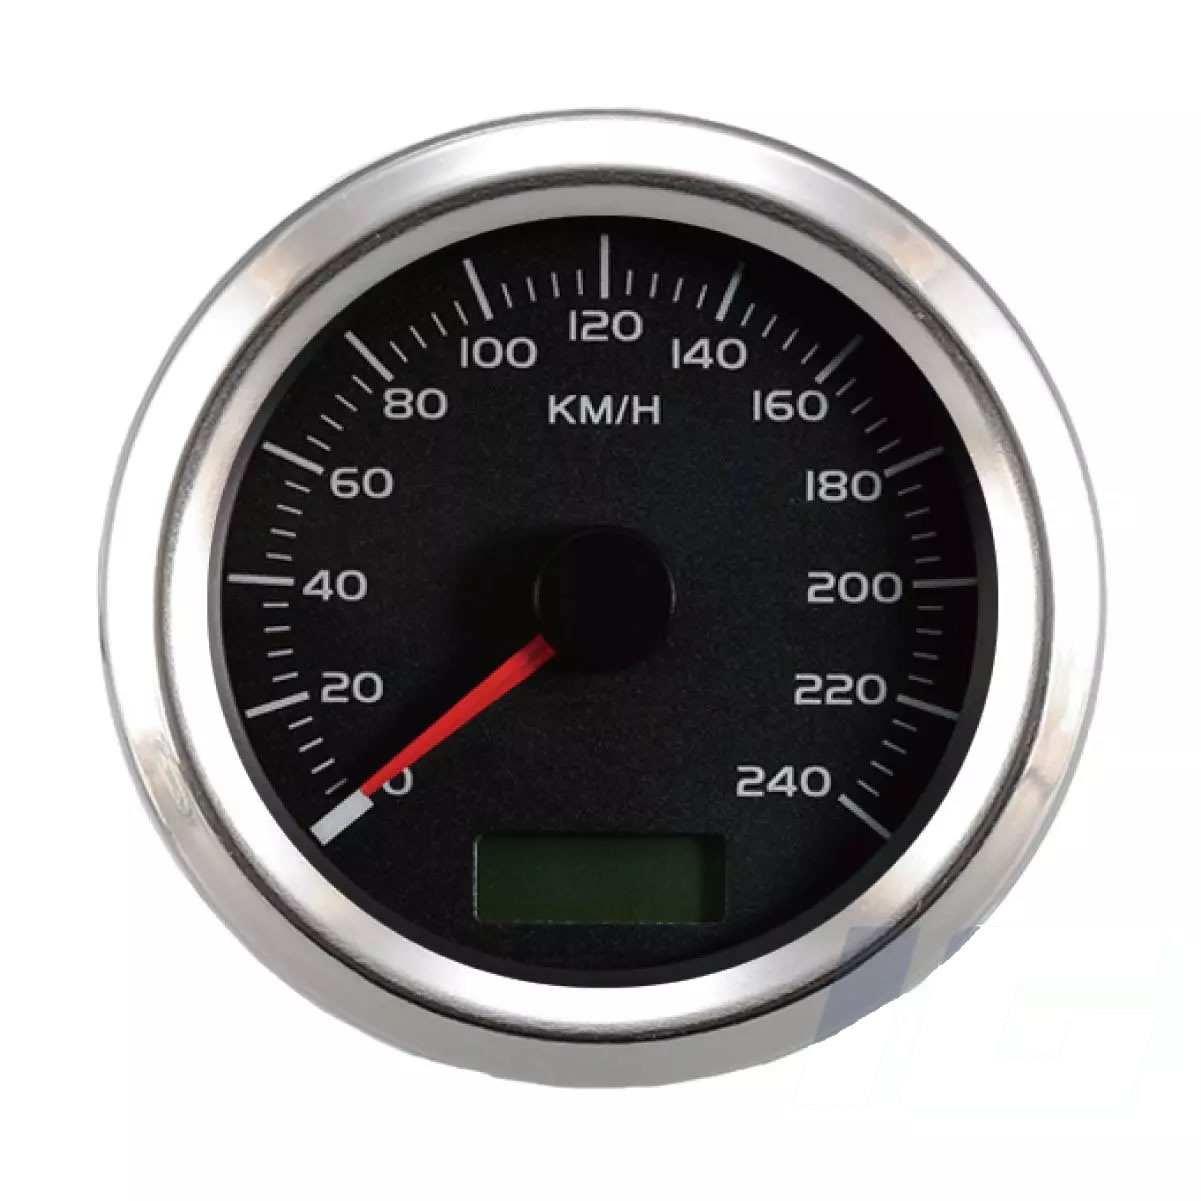 Aftermarket Gauge - Electronic Speedometer For Motorcycle